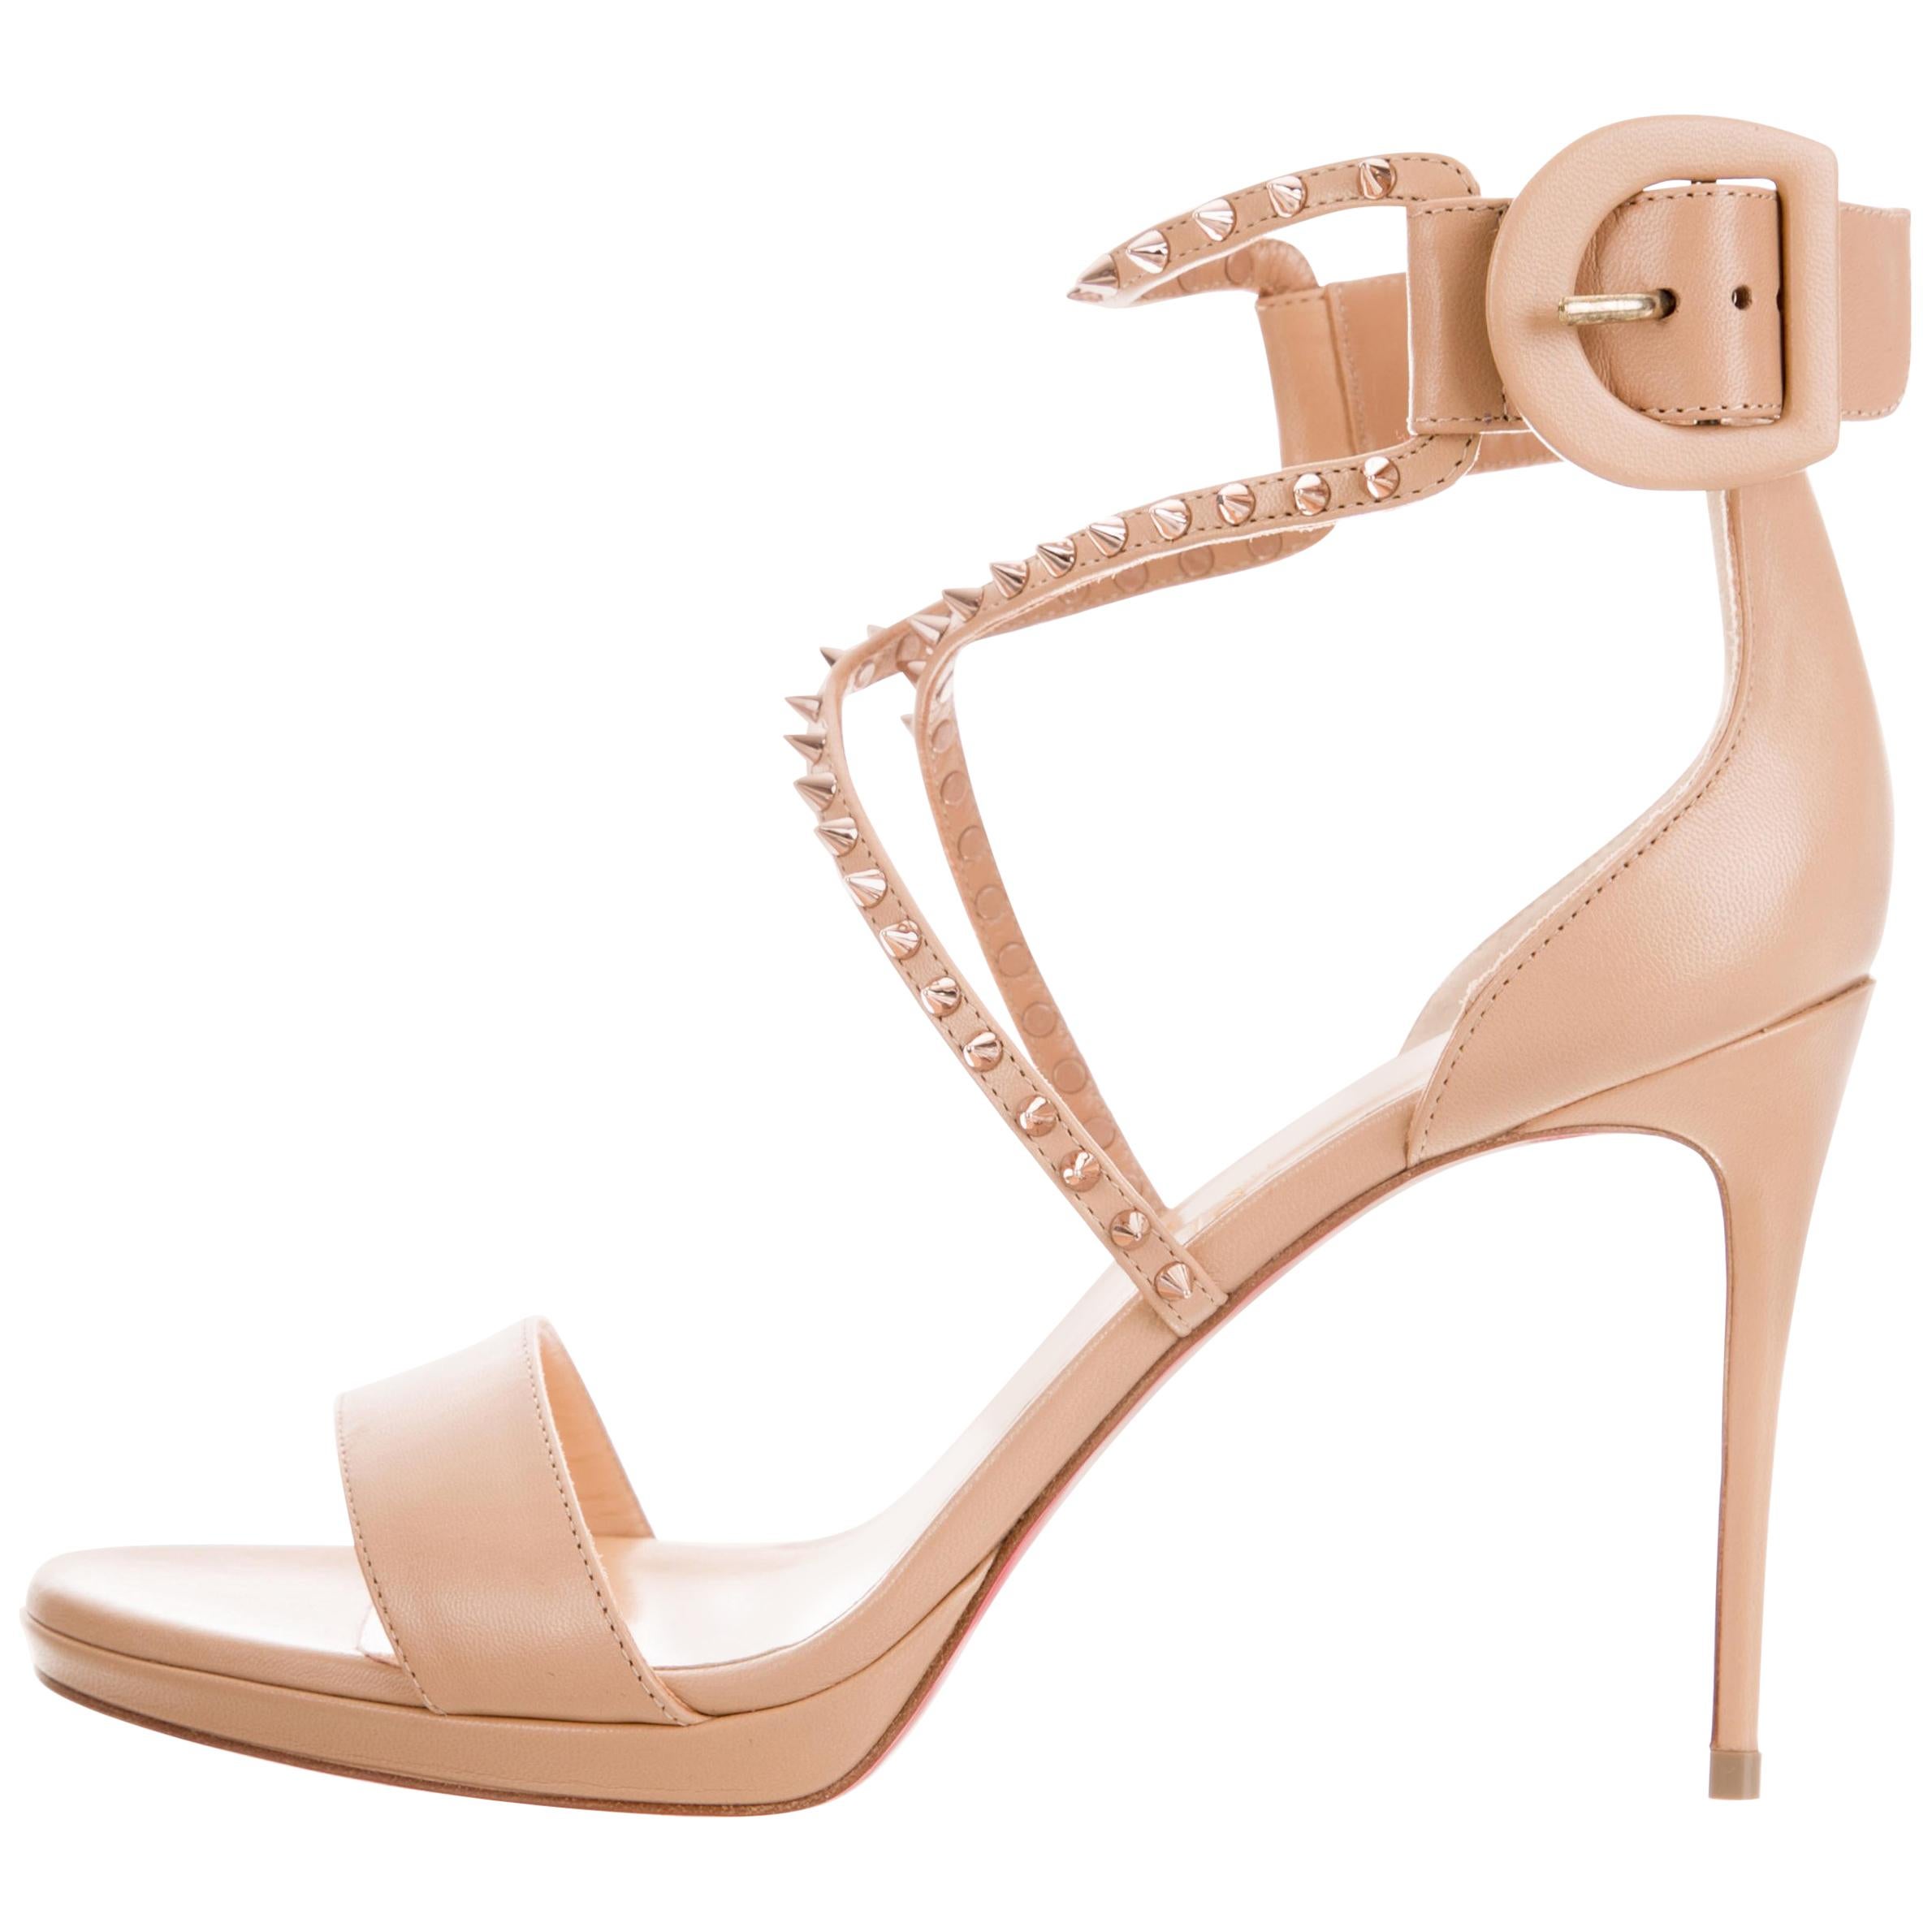 Christian Louboutin NEW Nude Leather Silver Spike Evening Sandals Heels 